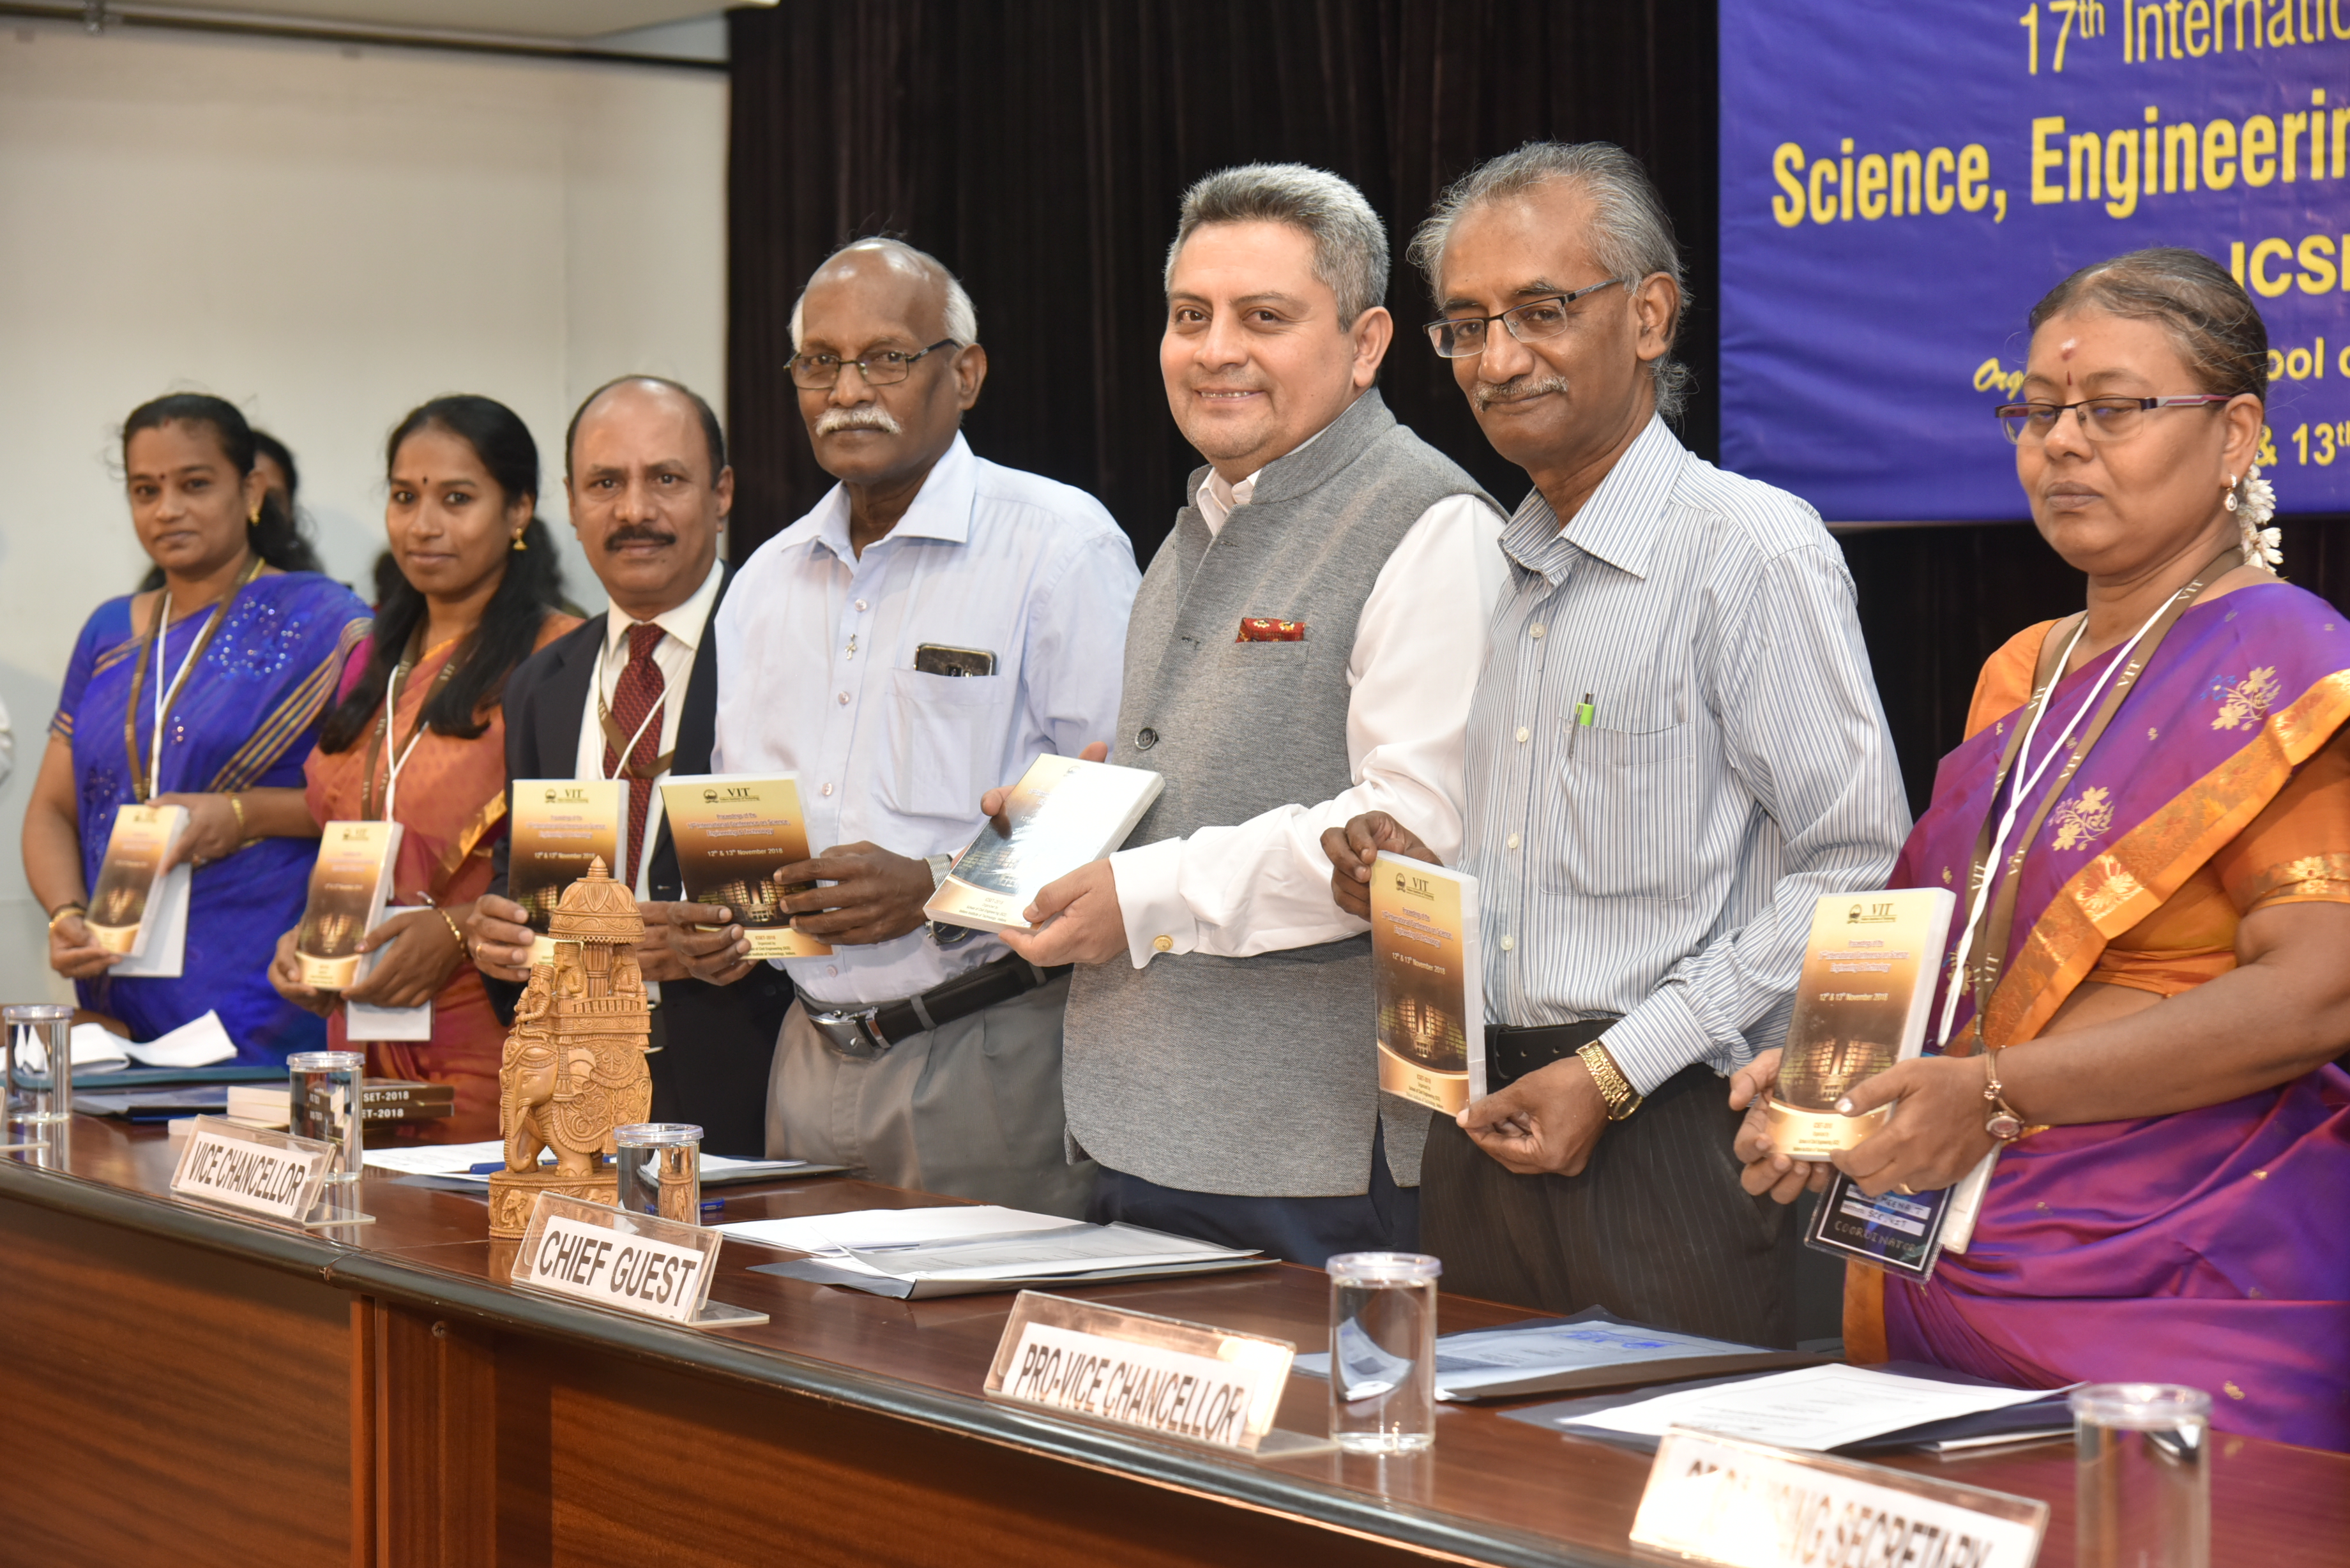 18th International Conference on Science, Engineering and Technology (ICSET)